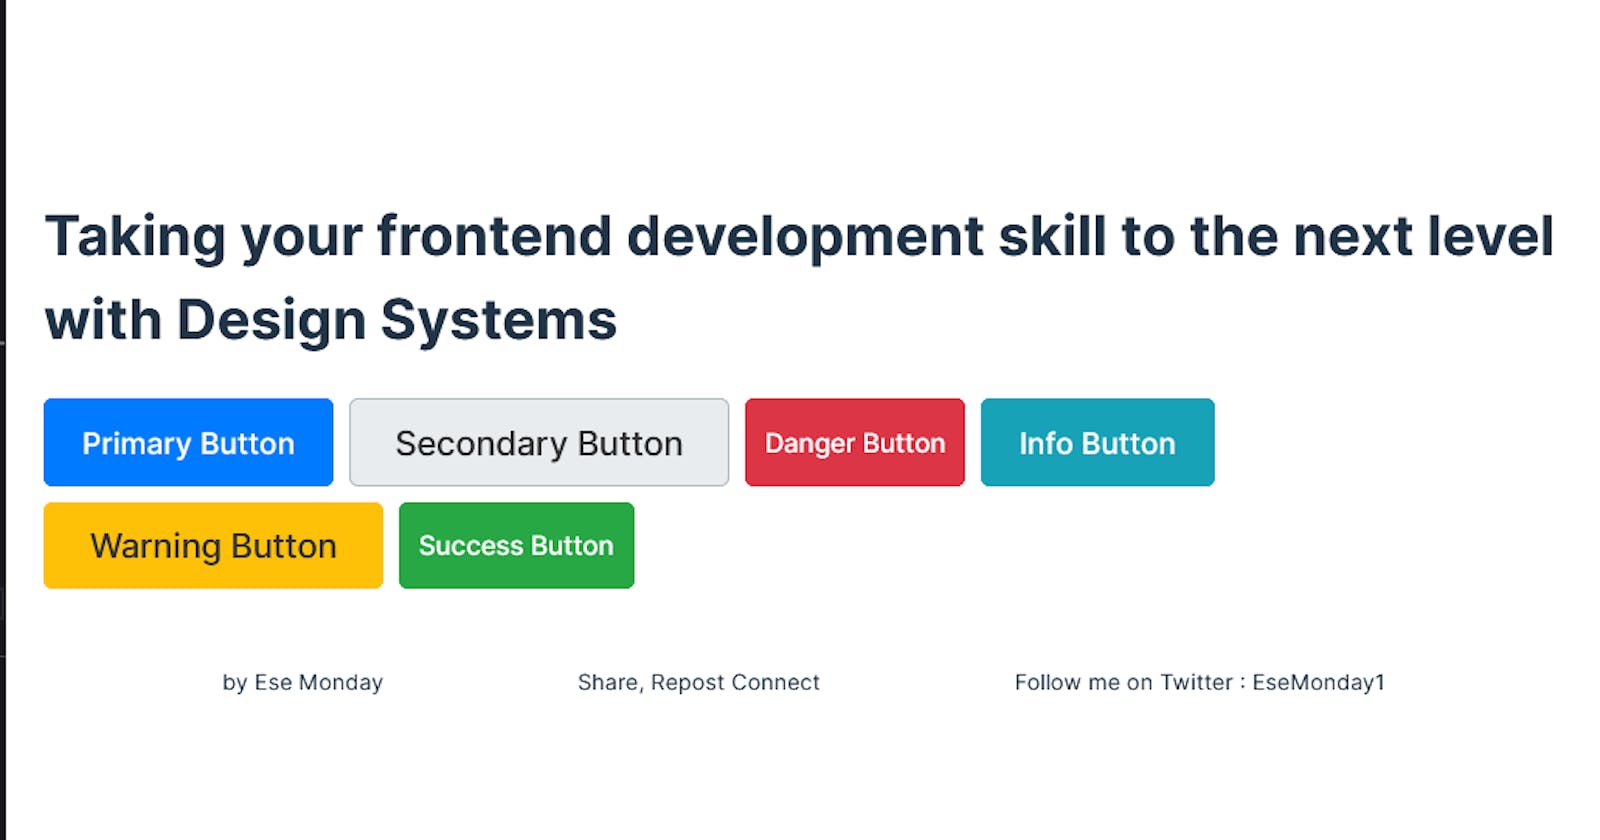 Taking your Frontend Development skill to the next level with Design Systems